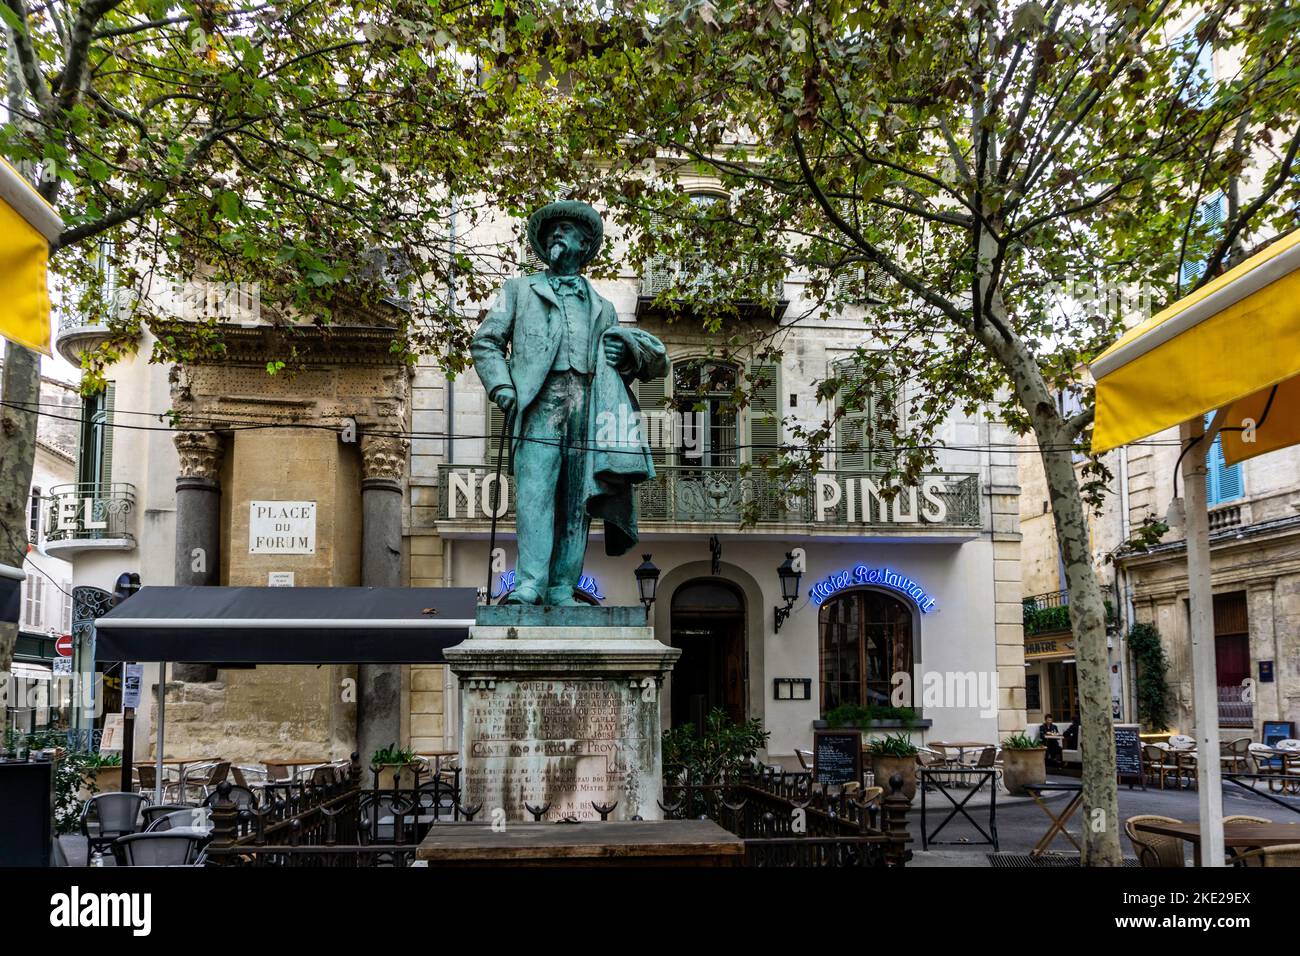 Statue of Frederic Mistral in Arles, France. French writer and lexicographer and Nobel Prize winner for literature in 1904. Stock Photo